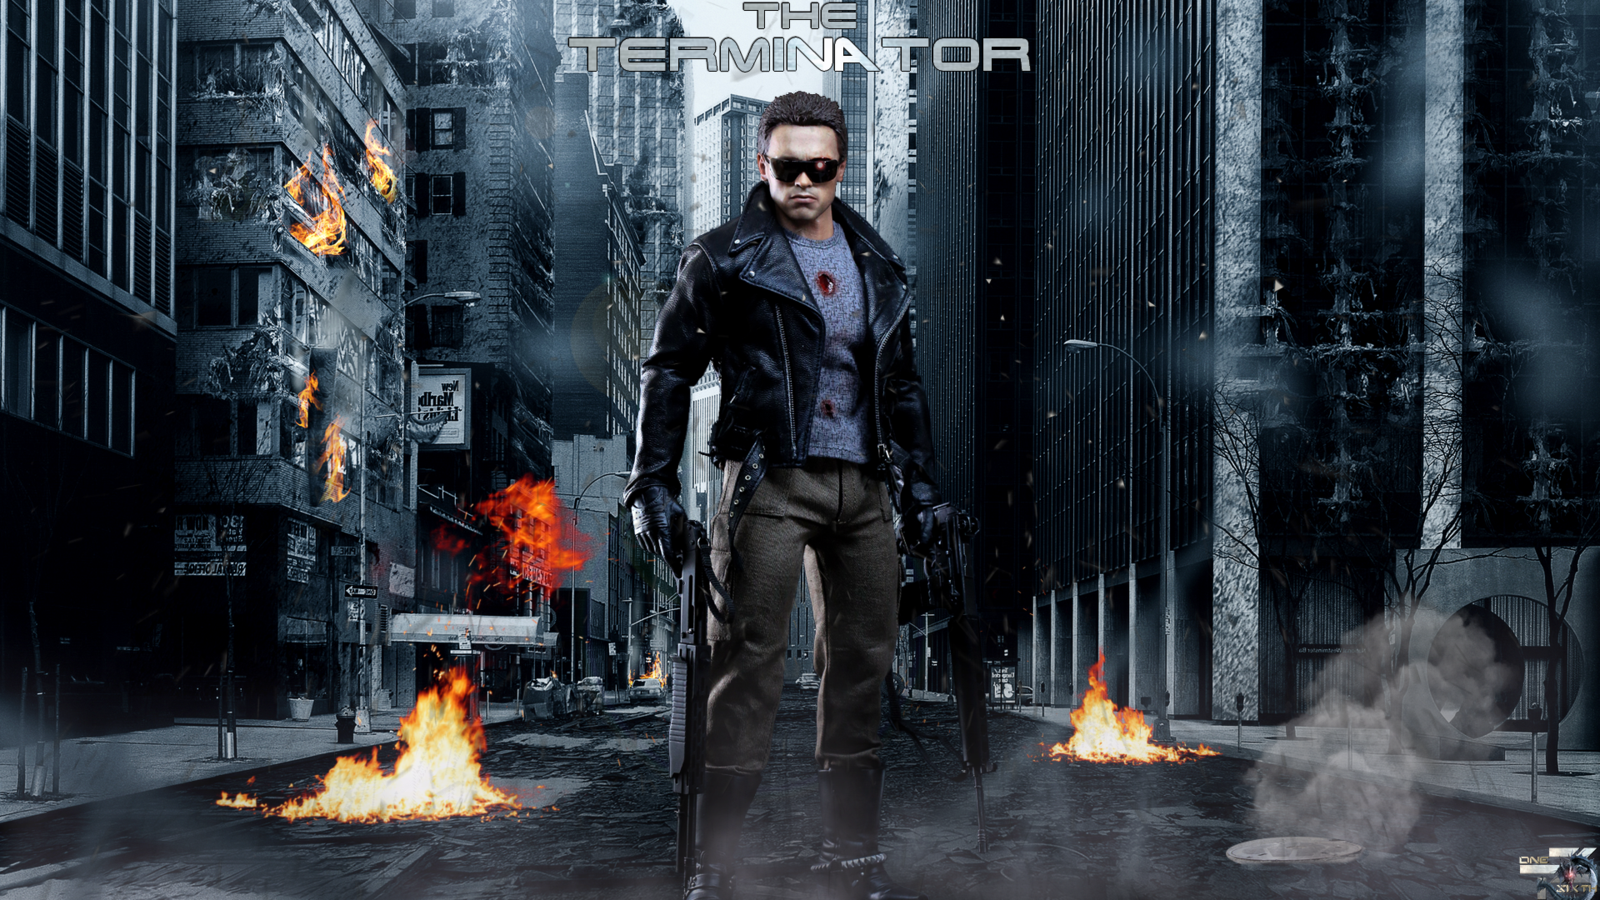 The Terminator Hot Toys Full HD Wallpaper By Davidcreativedesigns